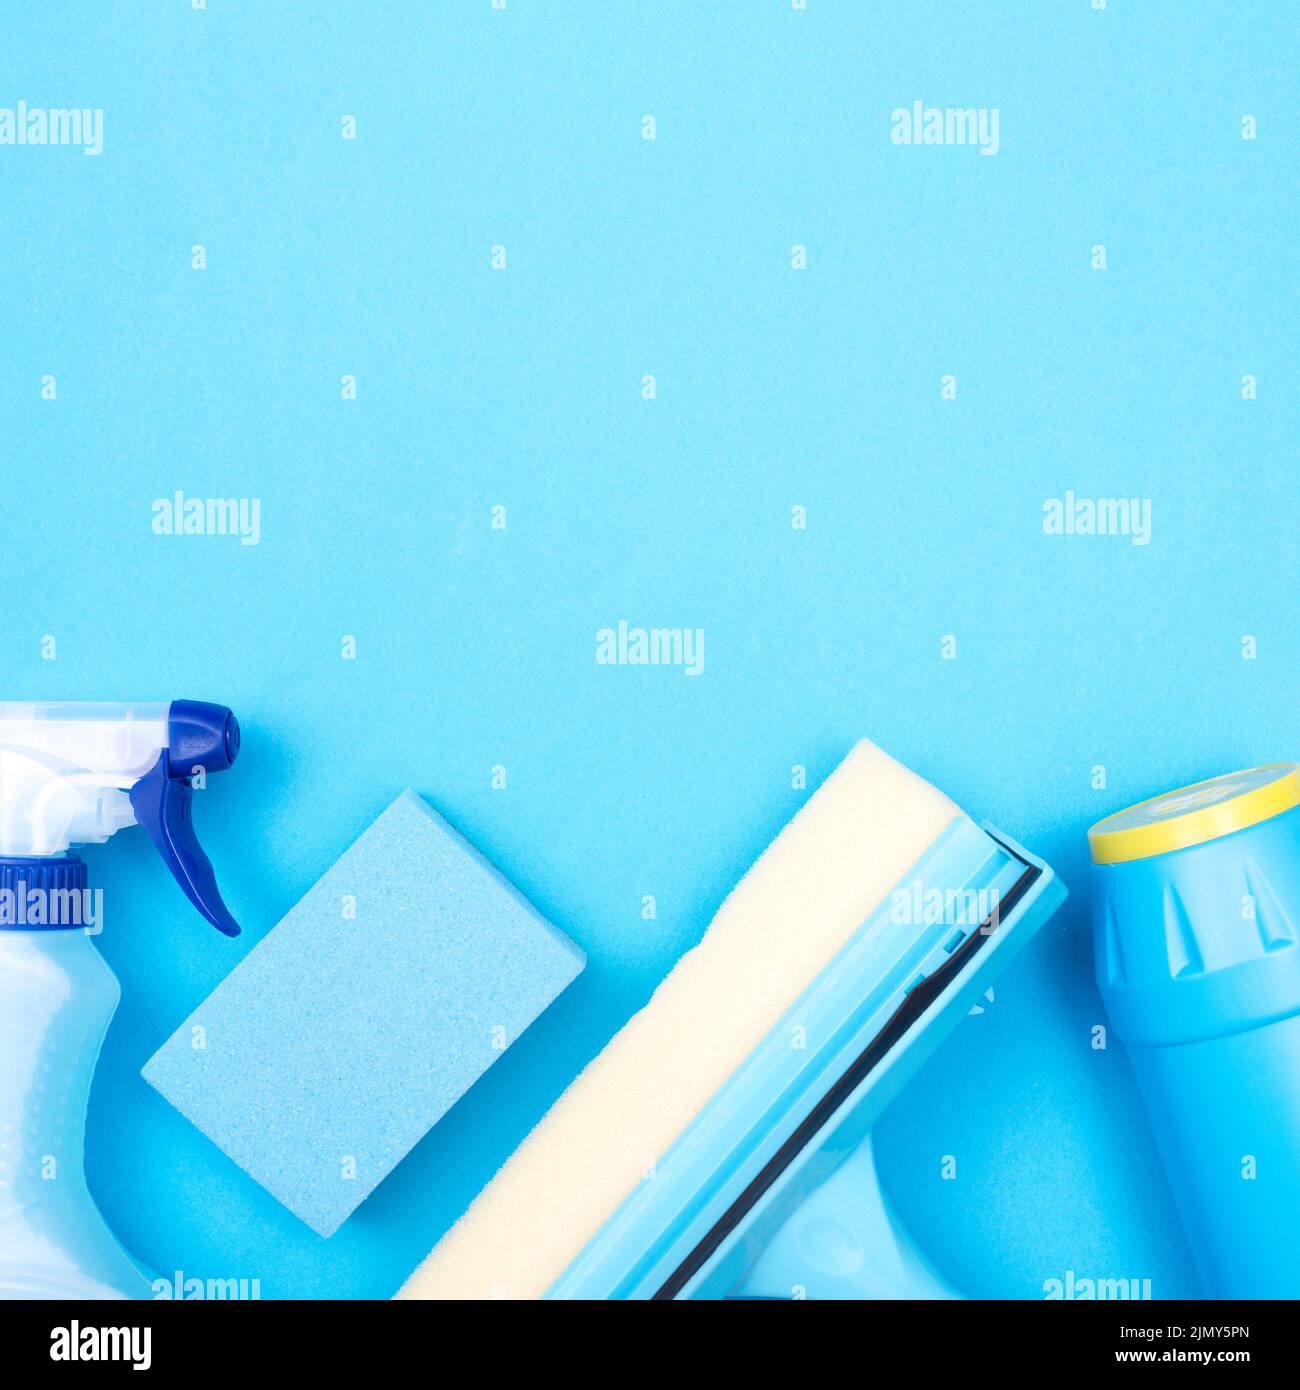 Housekeeping concept with cleaning products Stock Photo